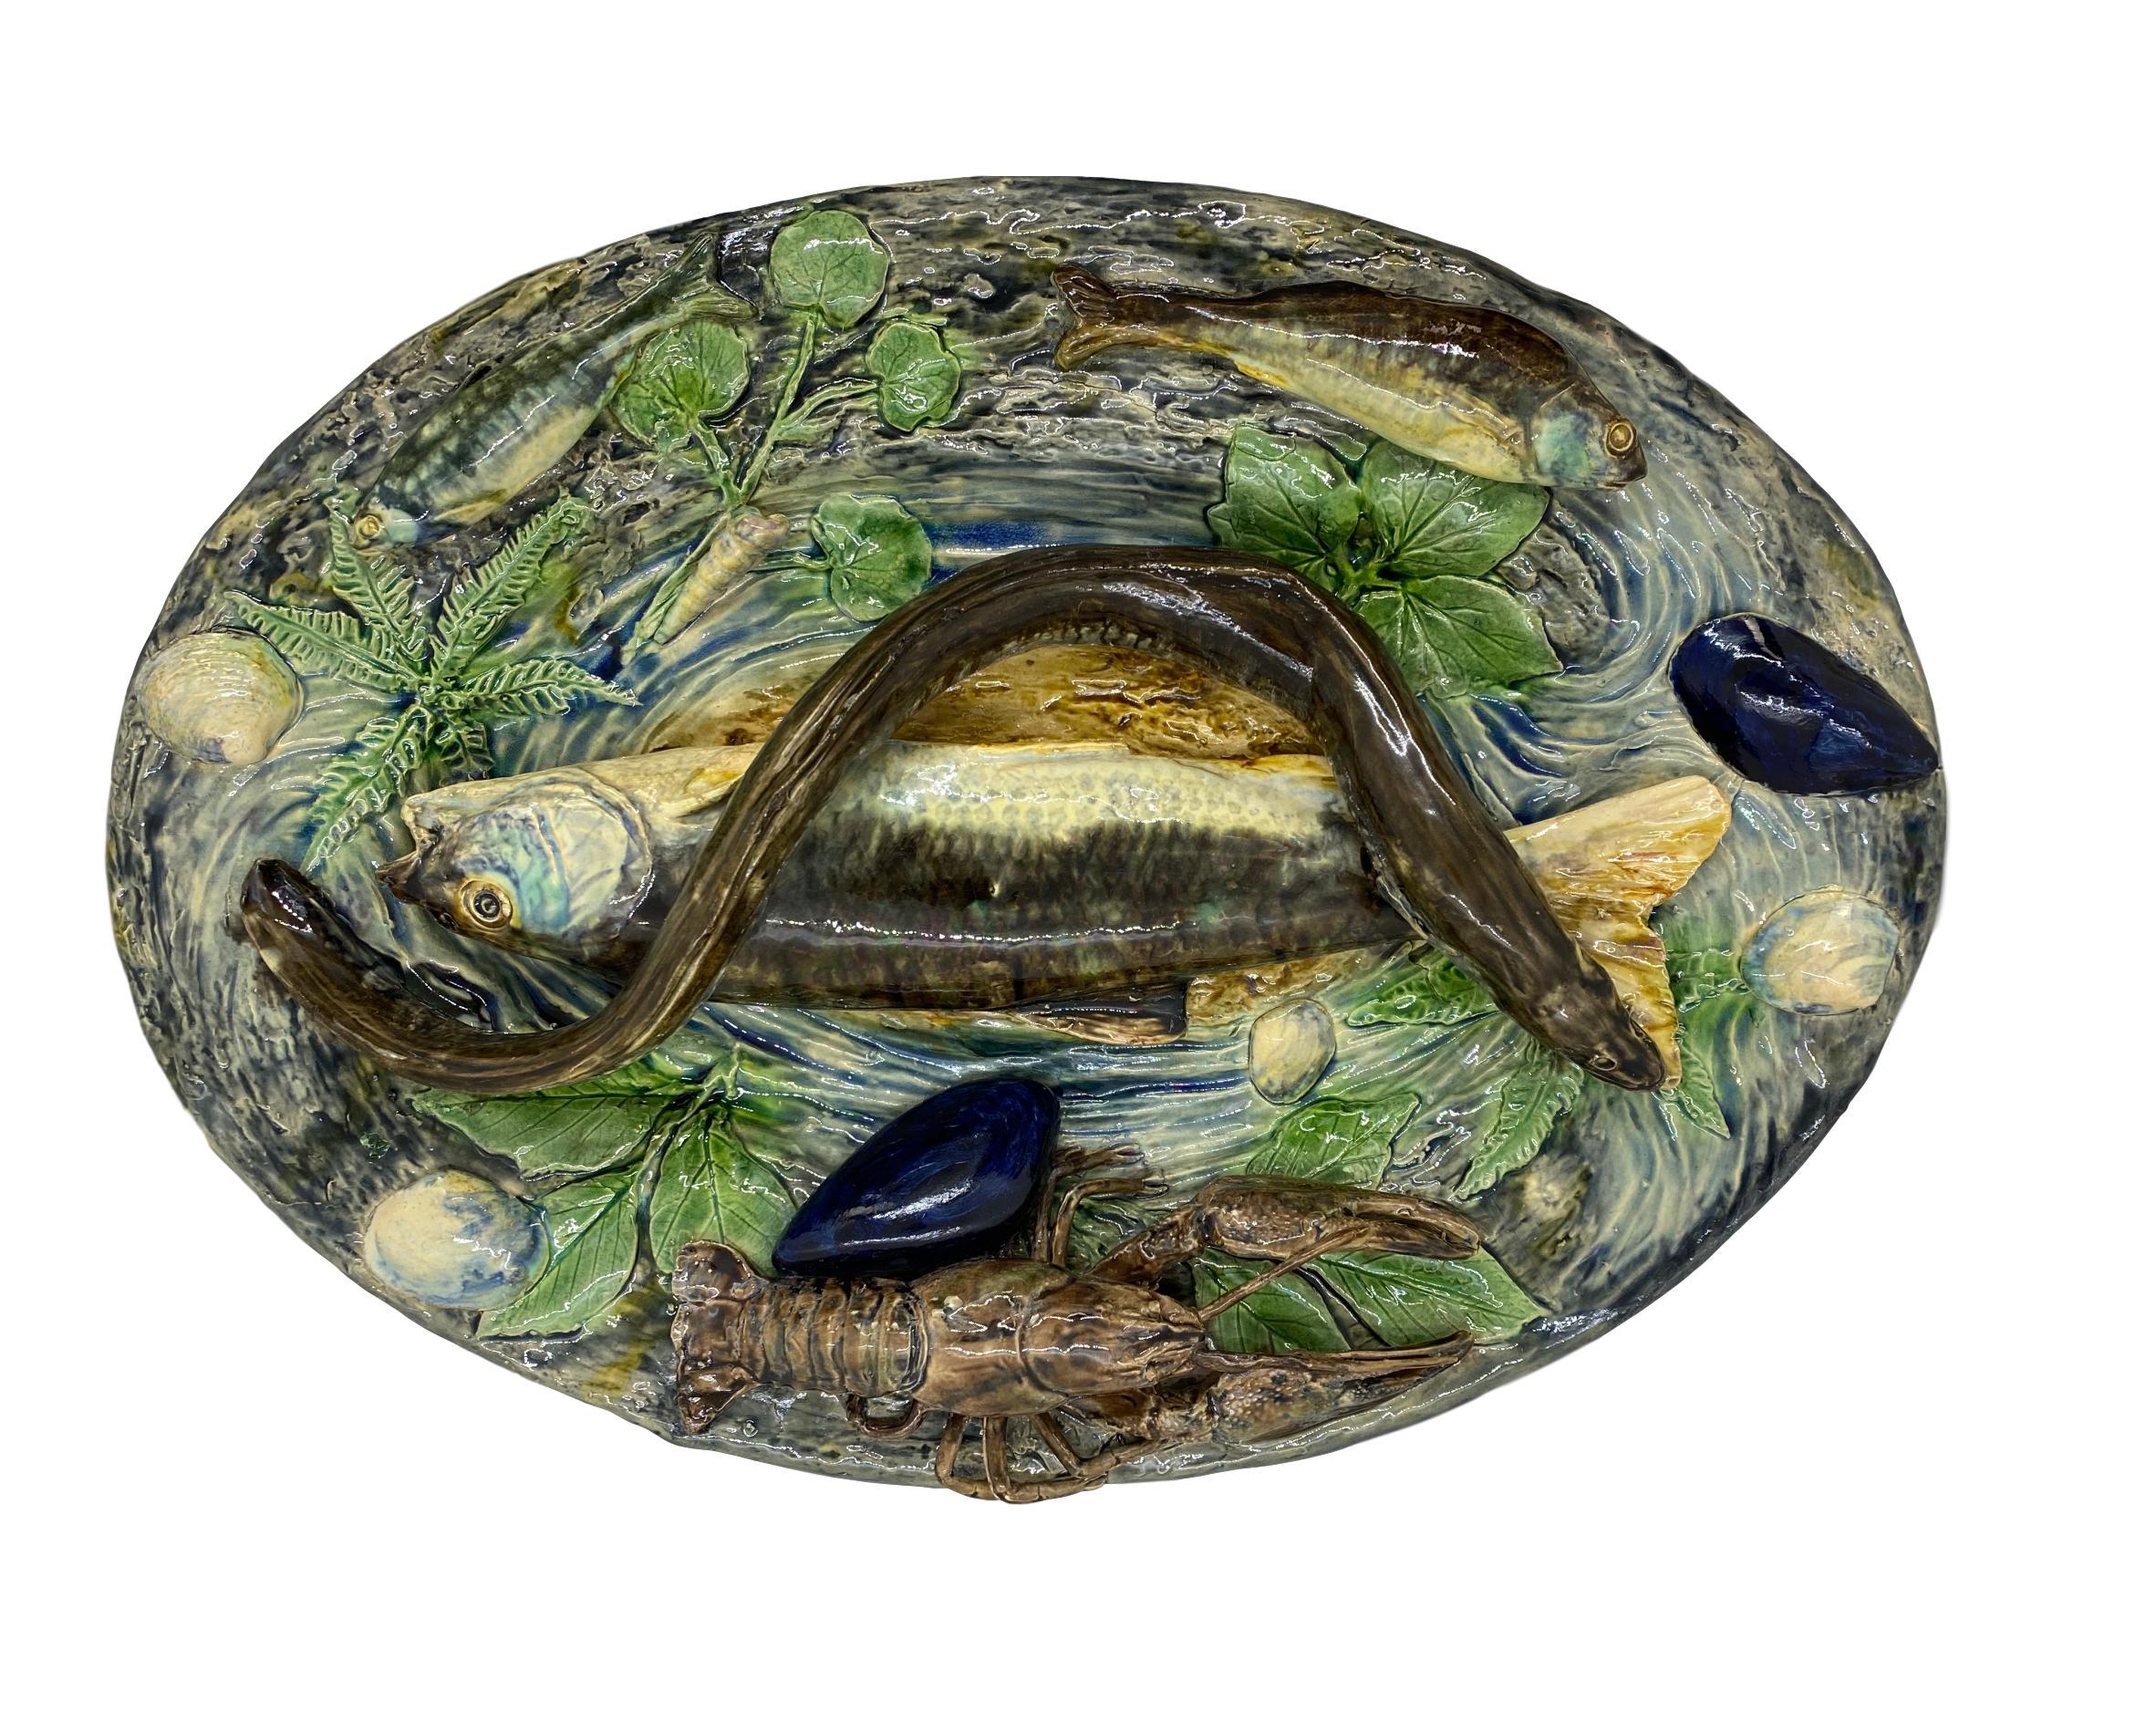 Large Plalissy ware Majolica Trompe L'oeil Platter by Alfred Renoleau (French 1854-1930), circa 1885.
Naturalistically molded and applied with a large fish and eel to the center, a lobster, and various smaller fish to the rim, with mussels and